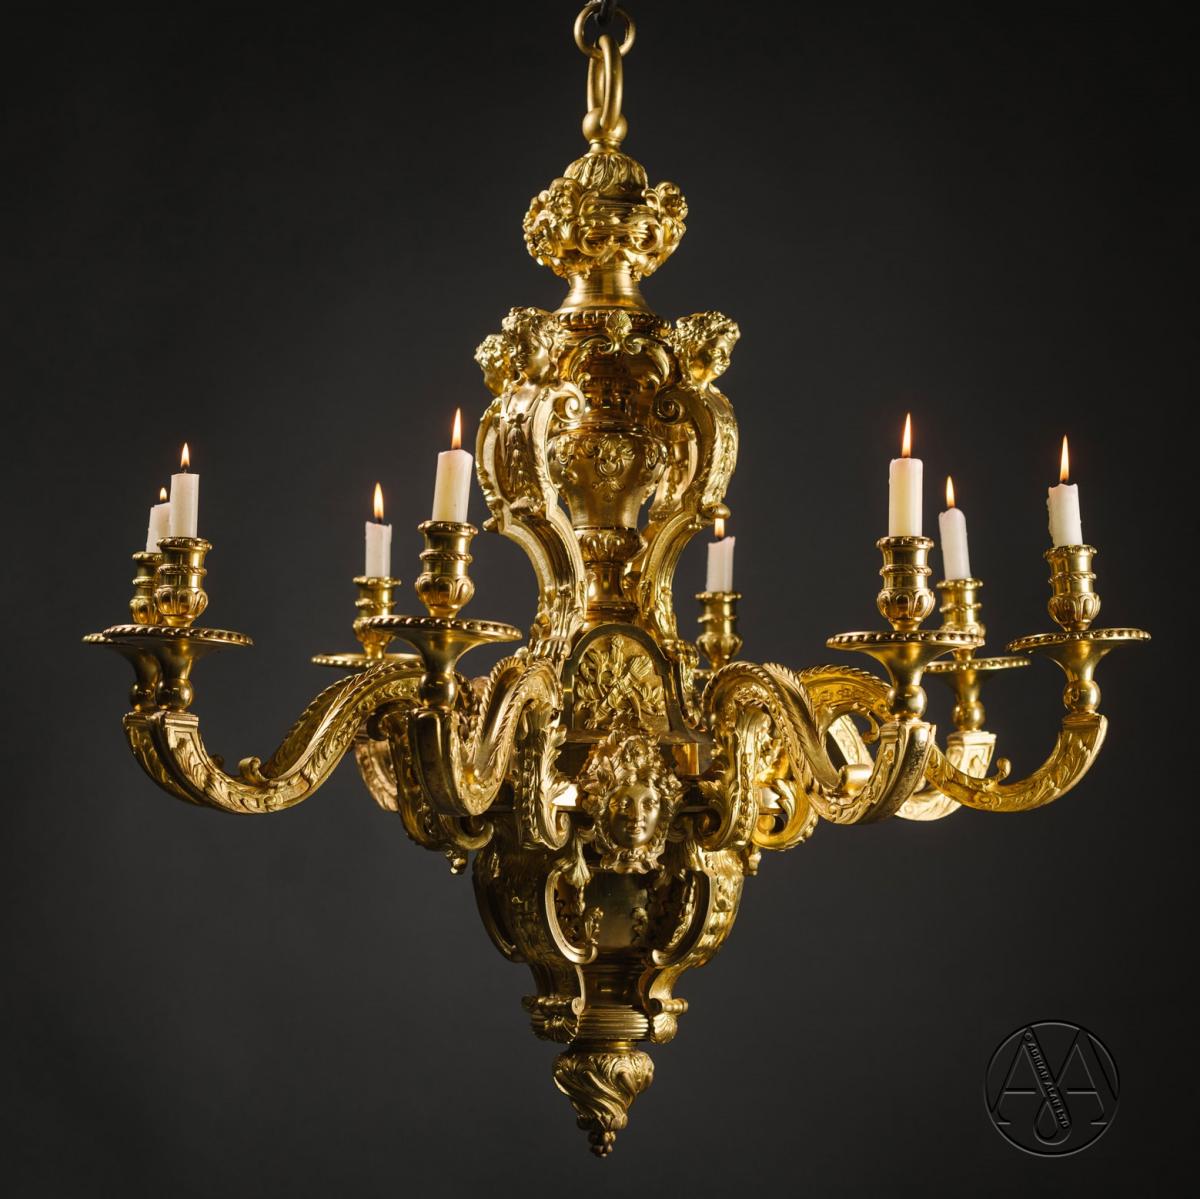 A Napoleon III Gilt-Bronze Eight-Light Chandelier After Boulle Dating From Circa 1870